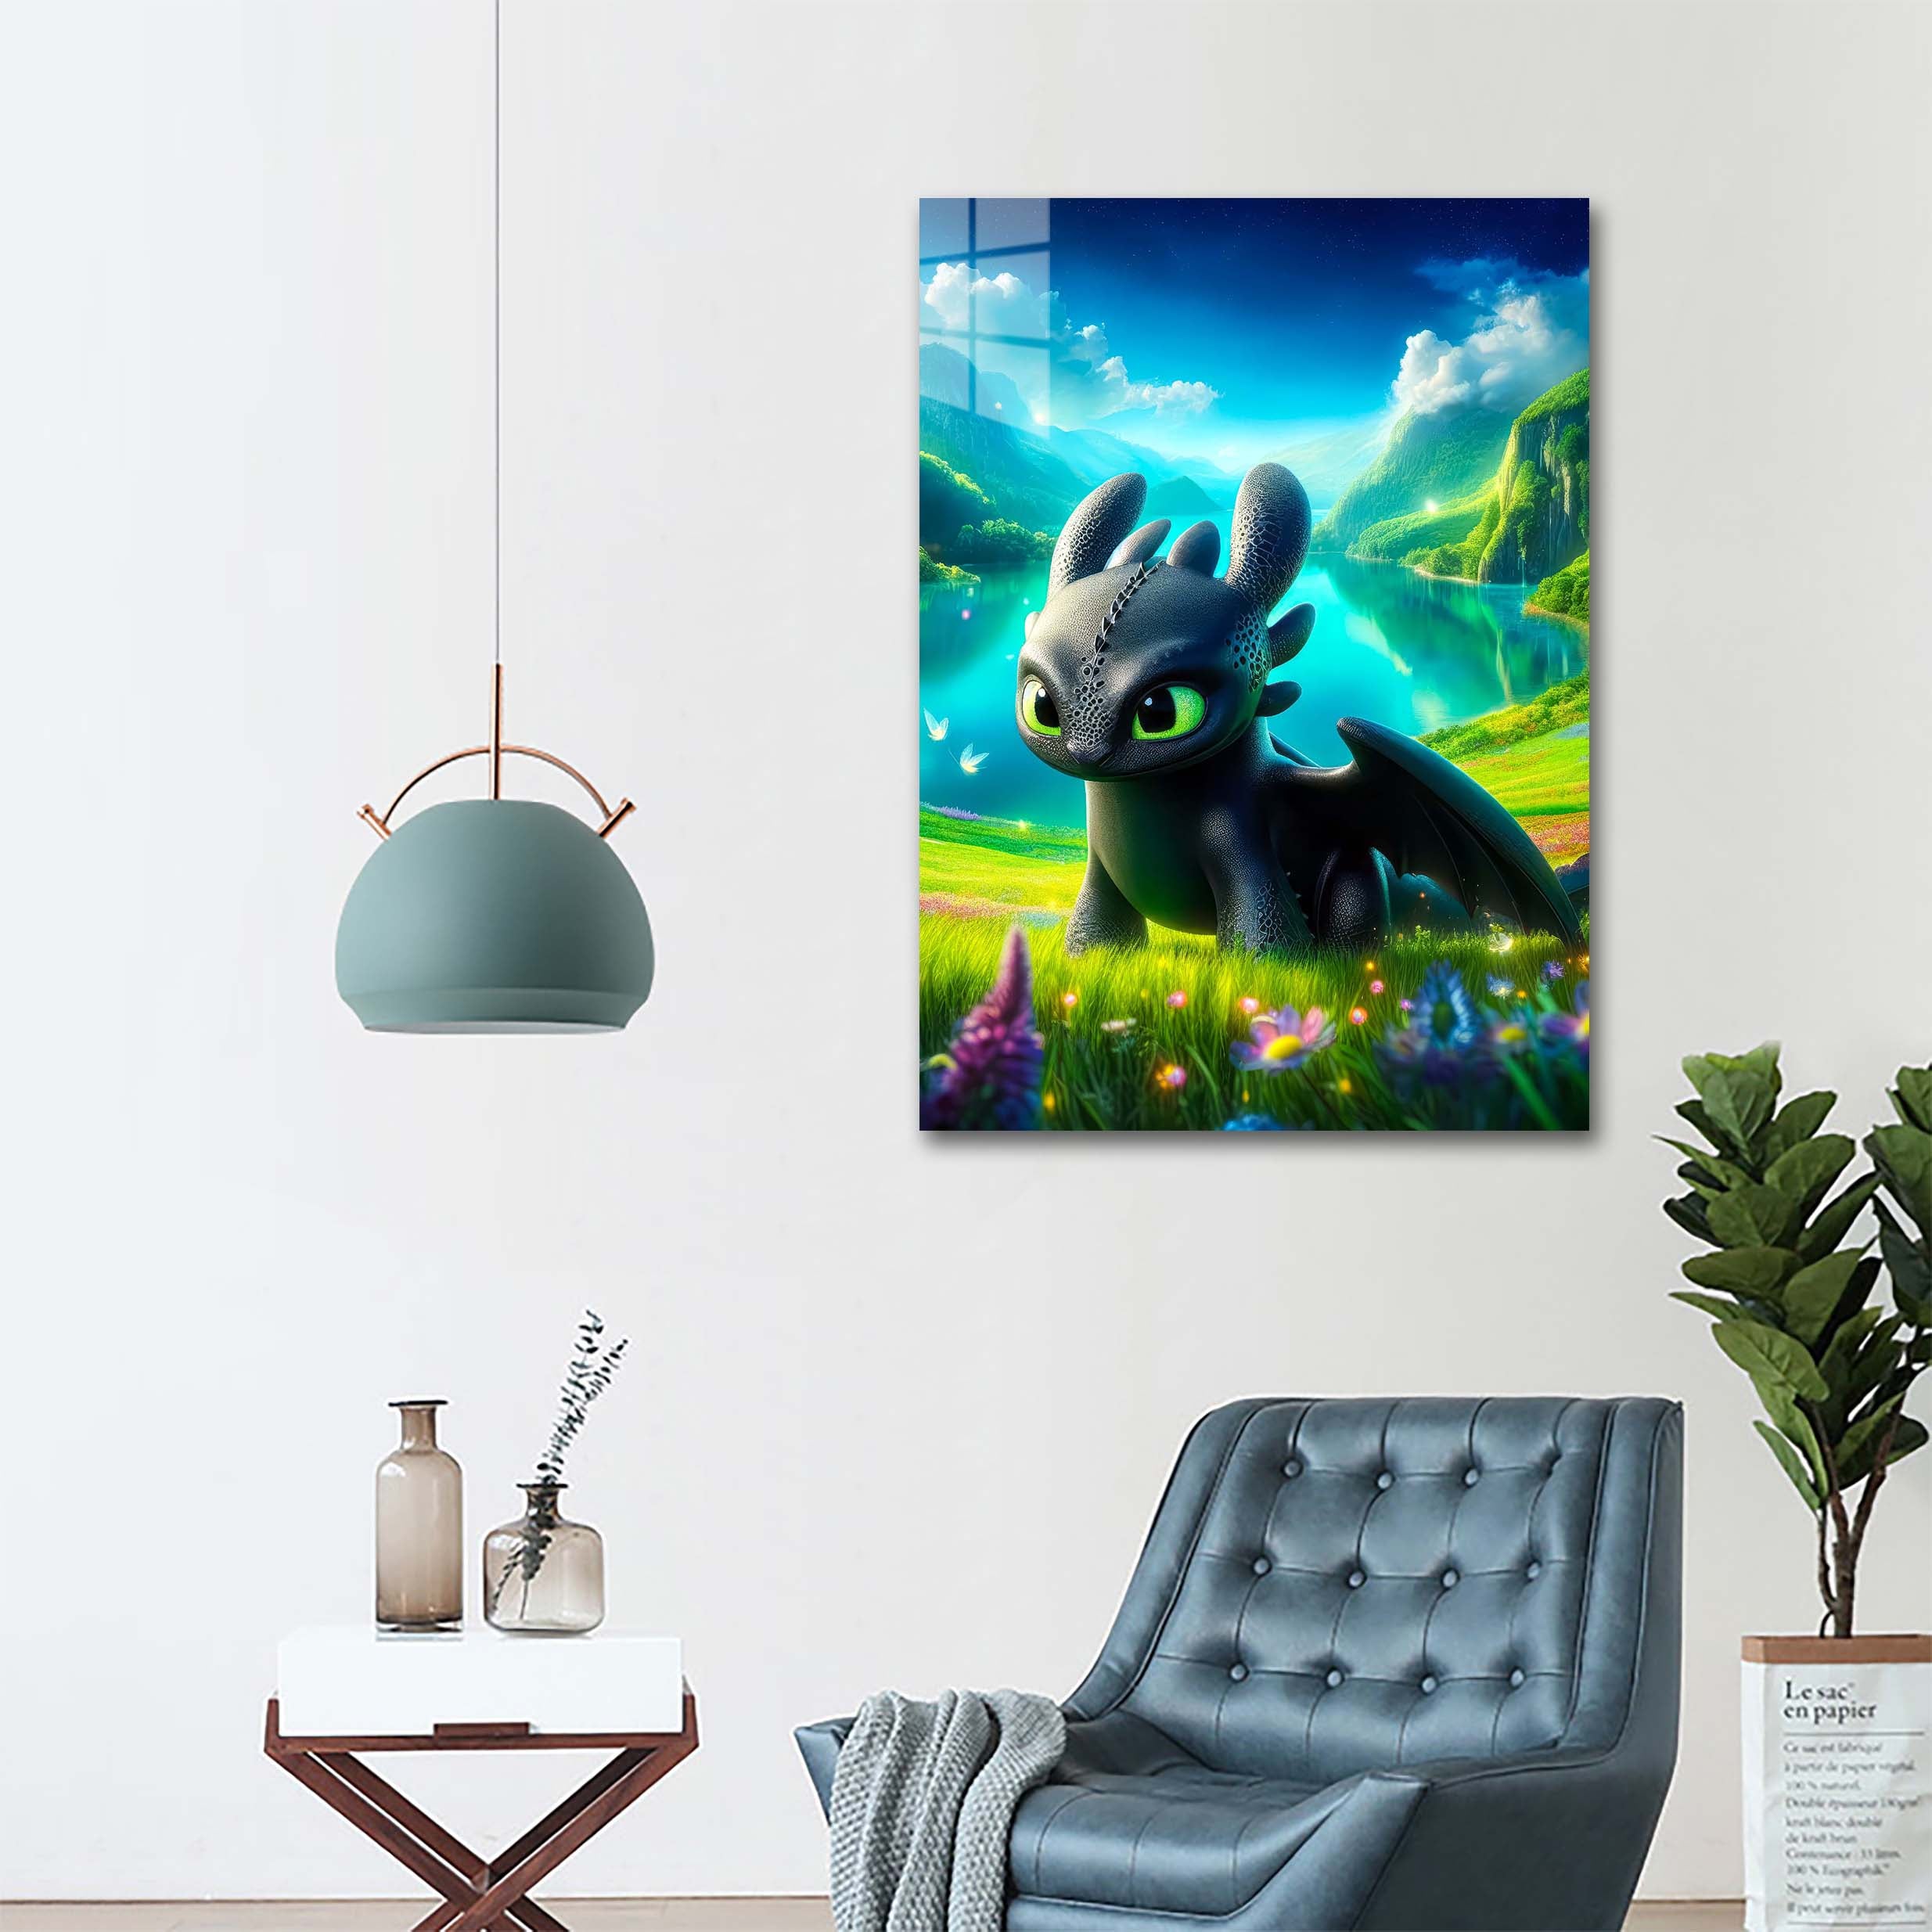 Toothless-designed by @starart_ia